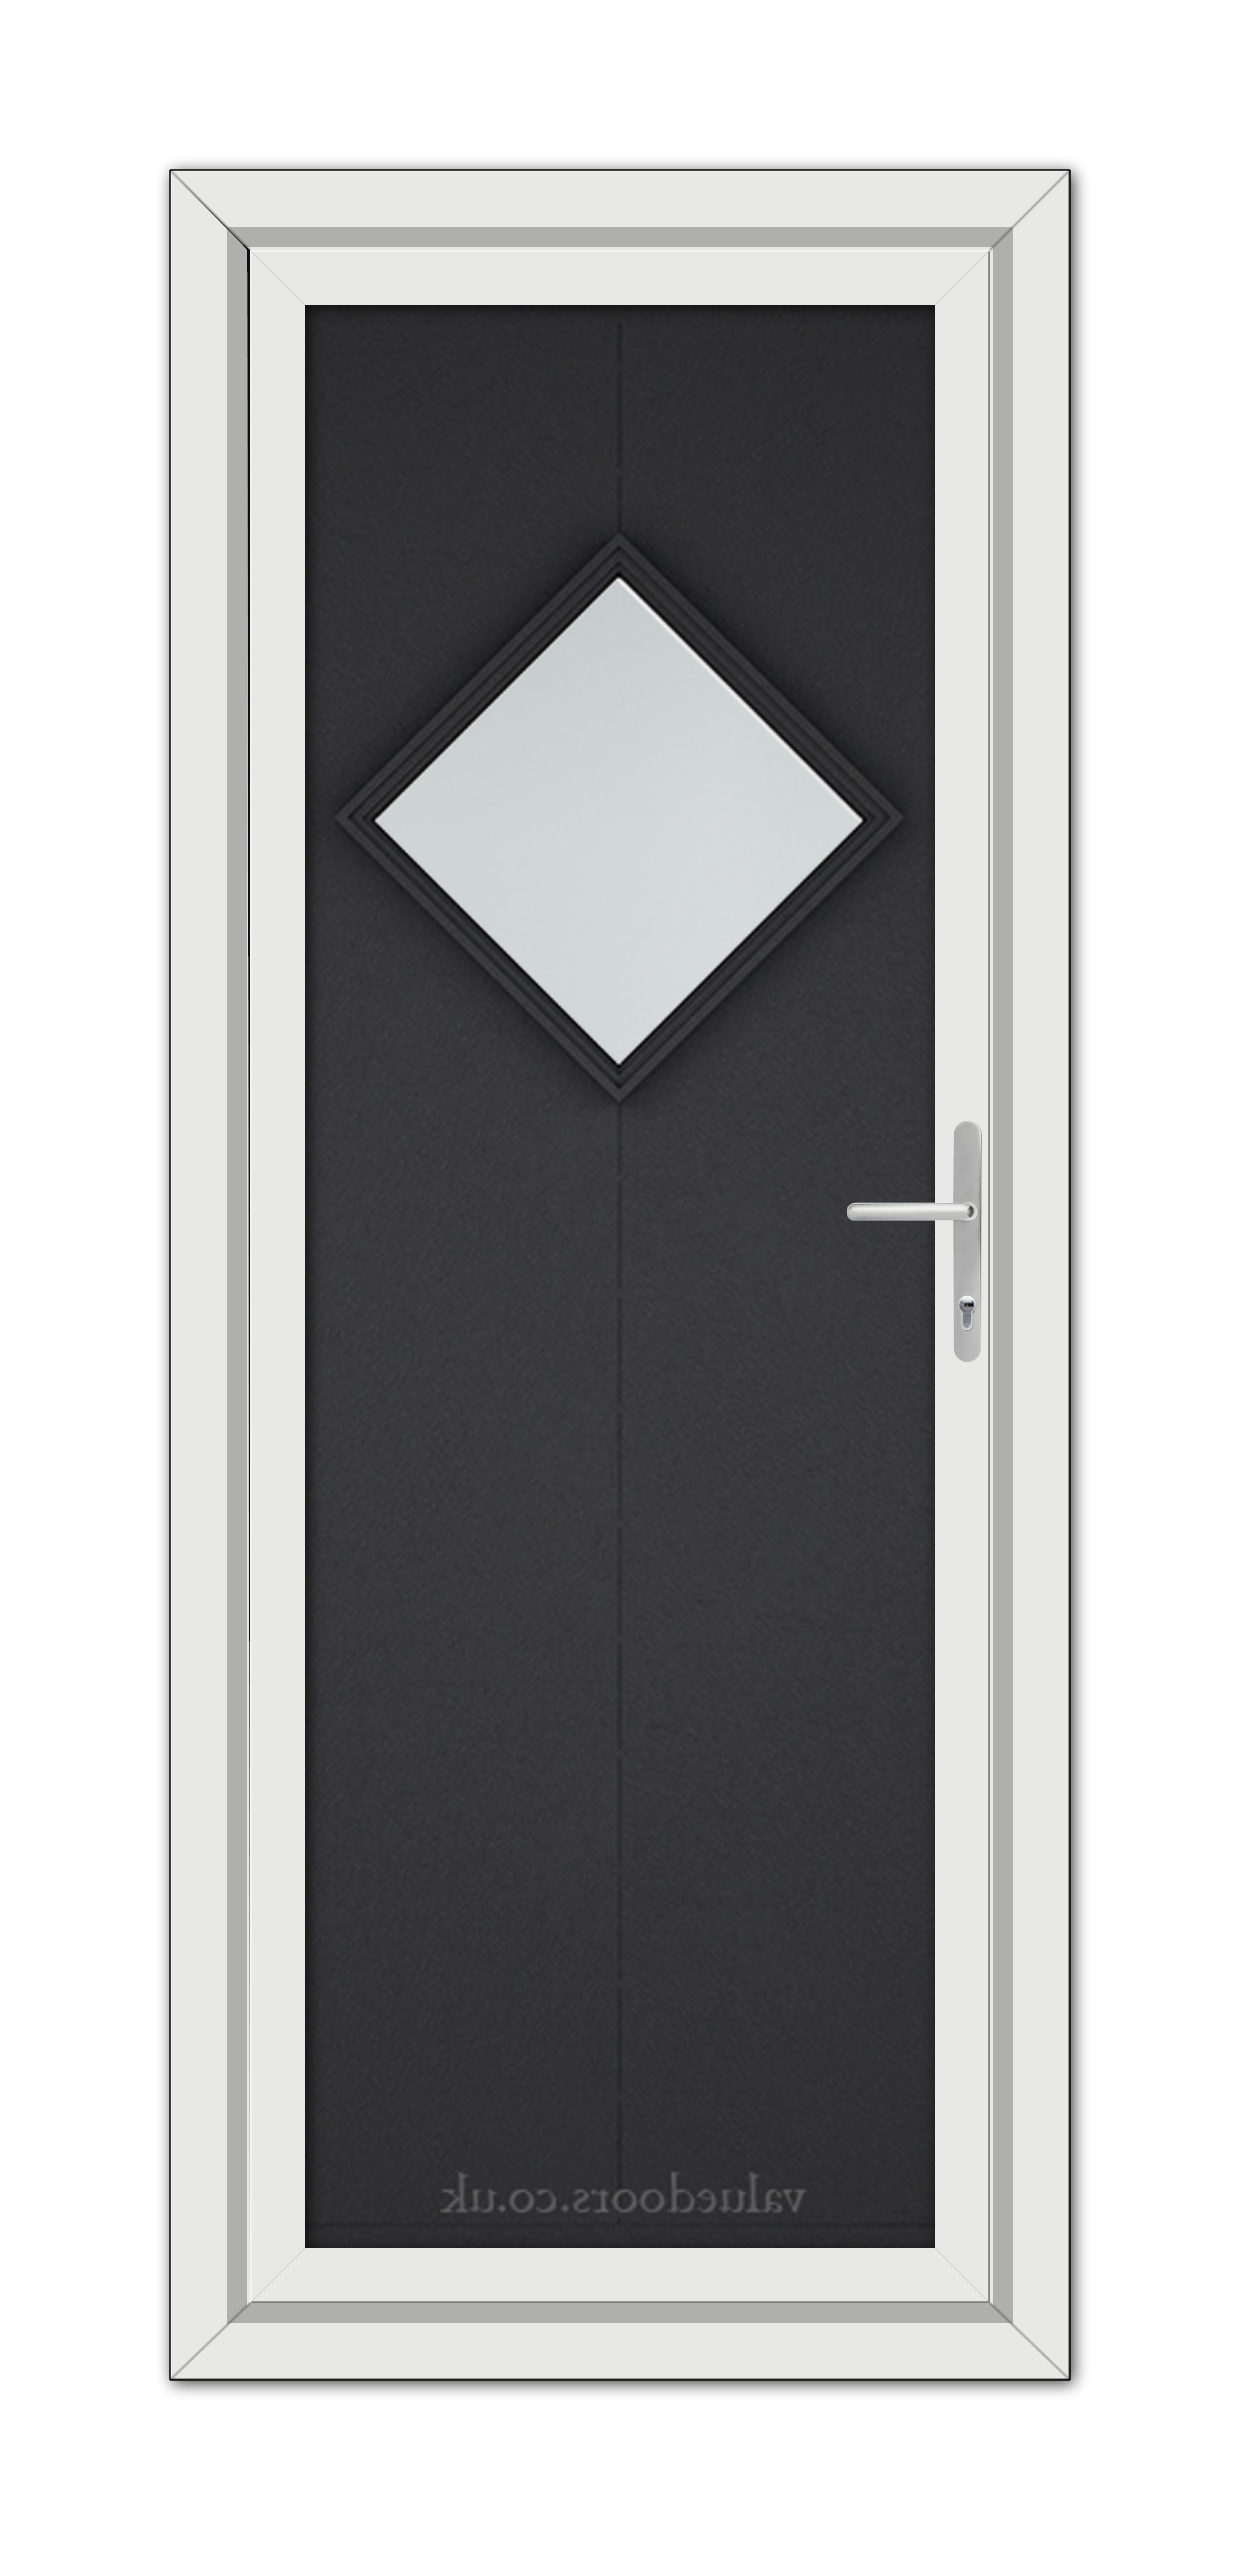 A modern Black Brown Hamburg uPVC Door framed in white, featuring a rhombus-shaped window and a silver handle, set against a simple background.